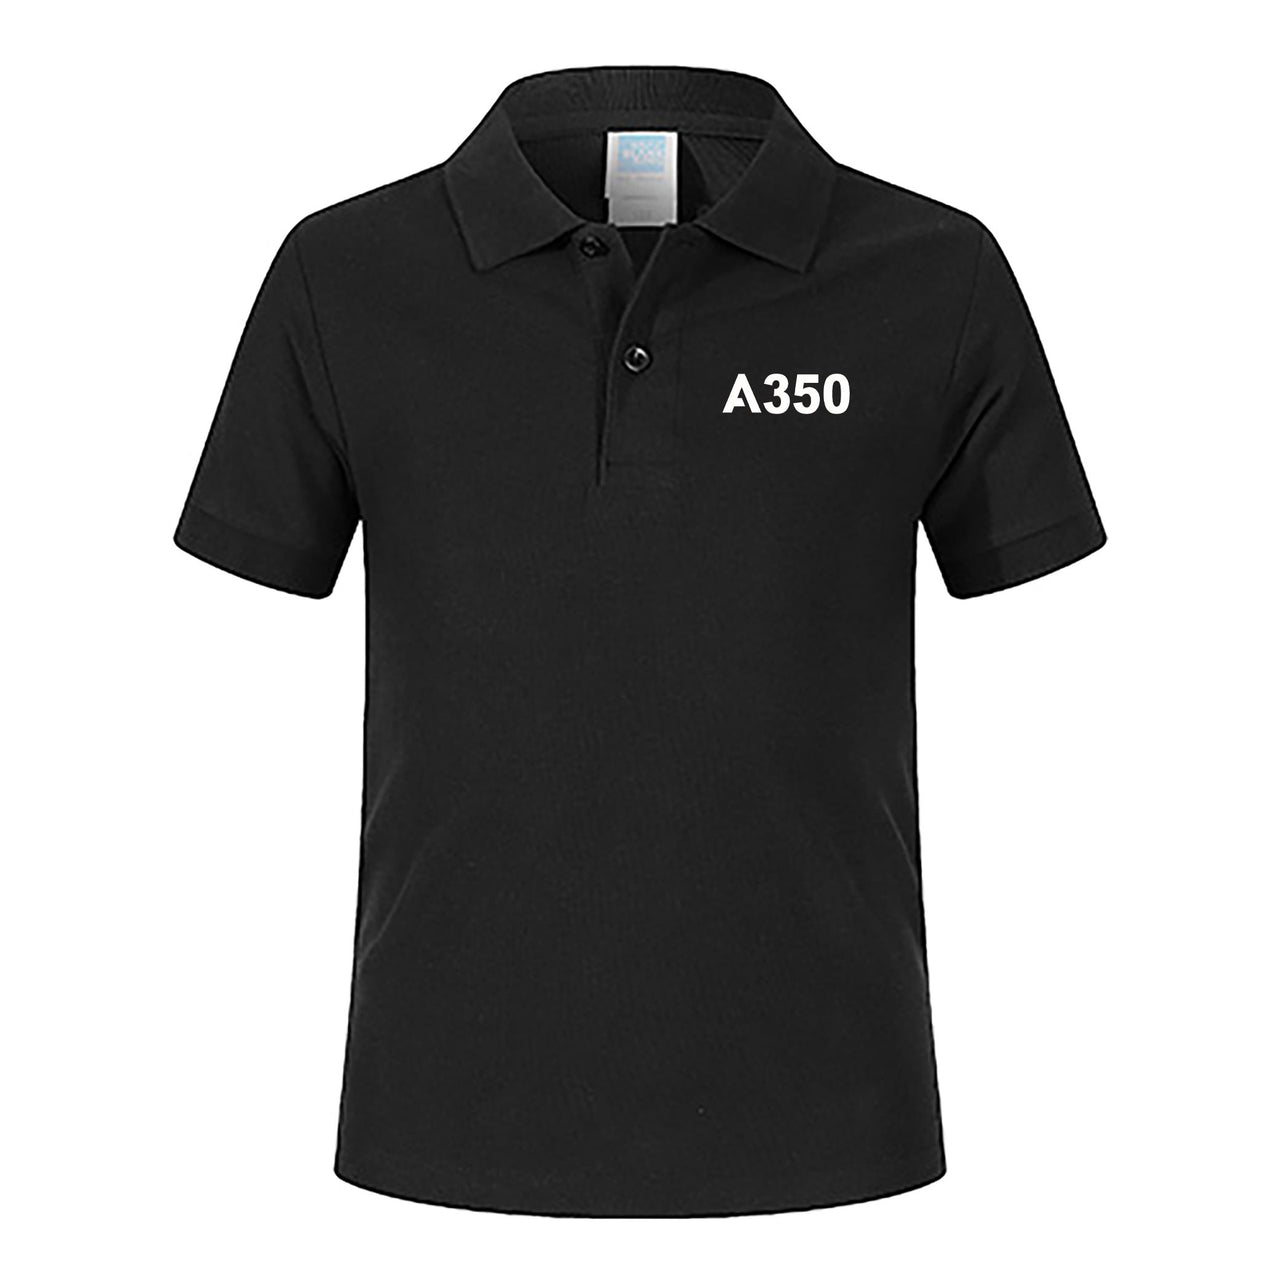 A350 Flat Text Designed Children Polo T-Shirts